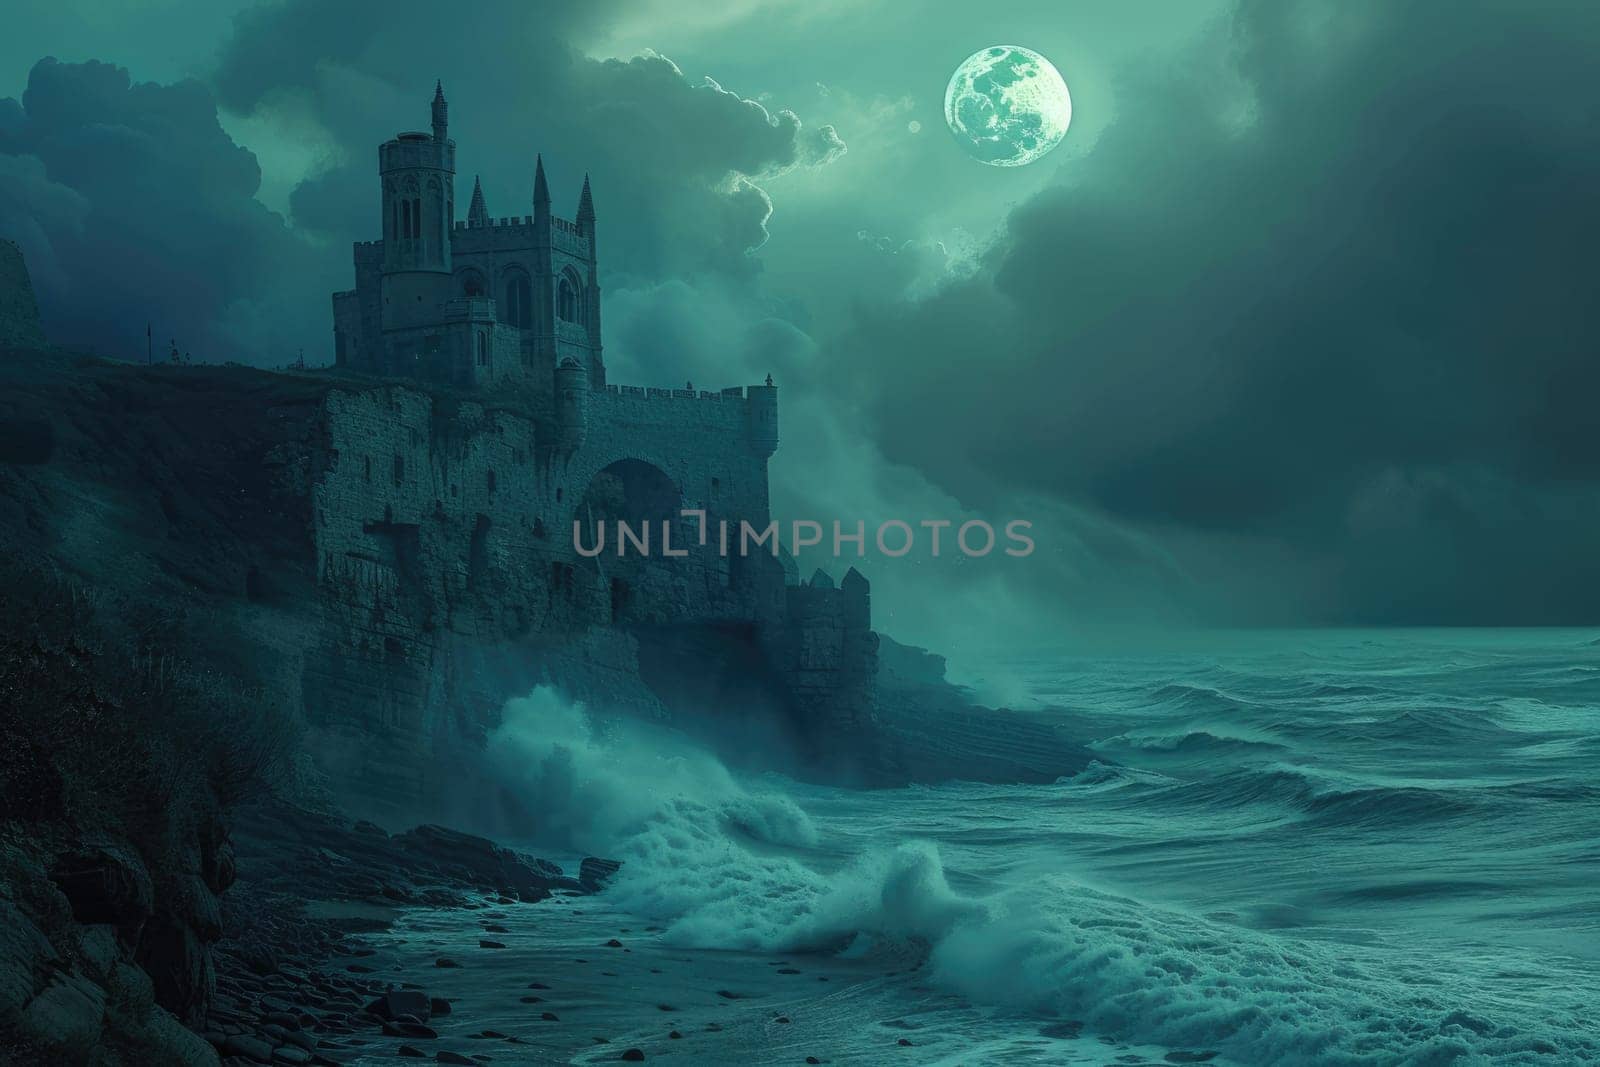 A medieval castle on a misty cliff, overlooking a turbulent sea. Resplendent. by biancoblue